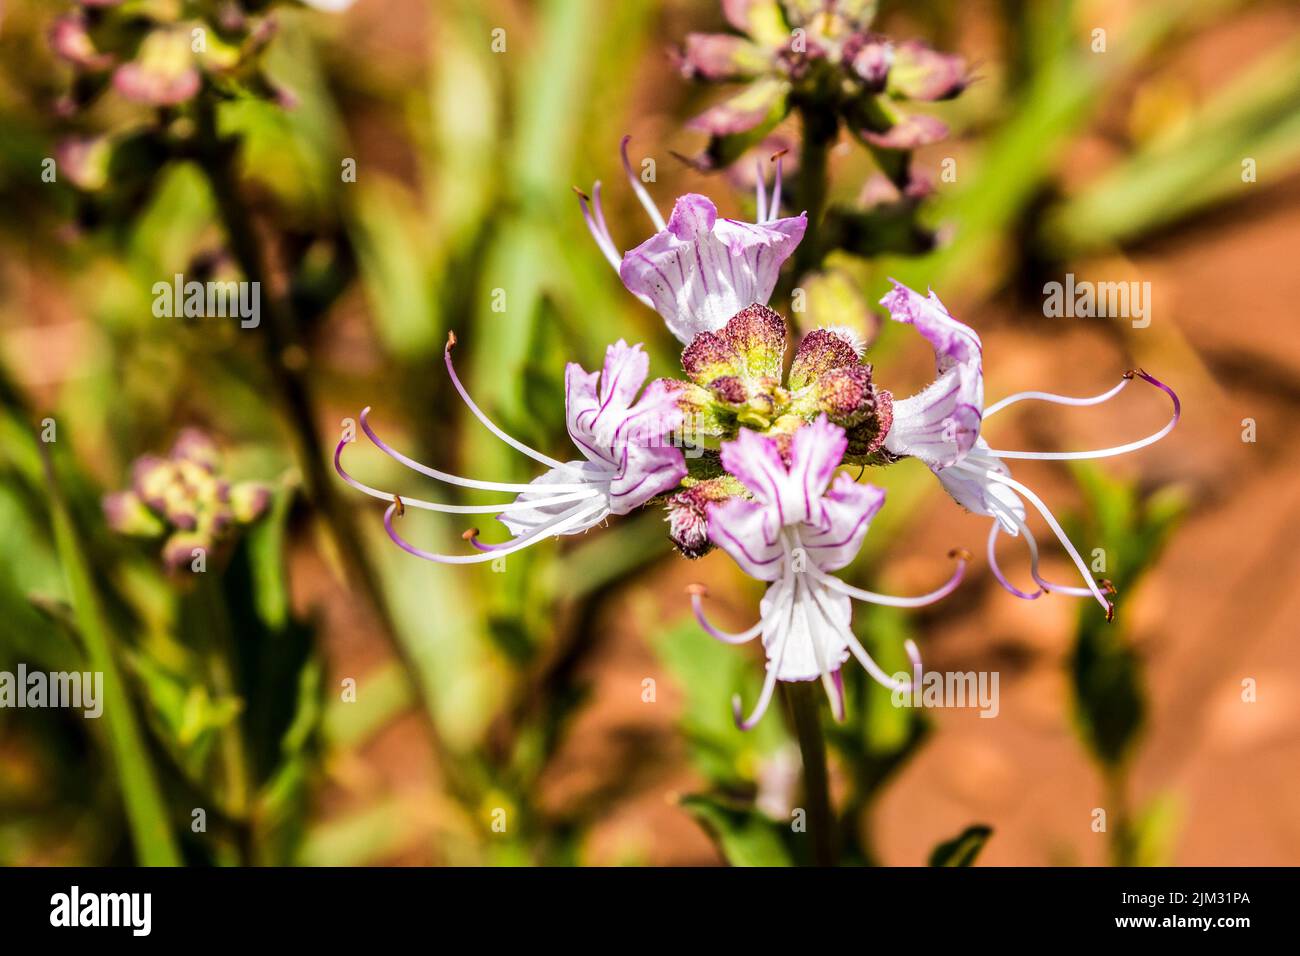 Close-up of the delicate purple striped white flowers of a cat’s wiskers, Ocimum obovatum Stock Photo